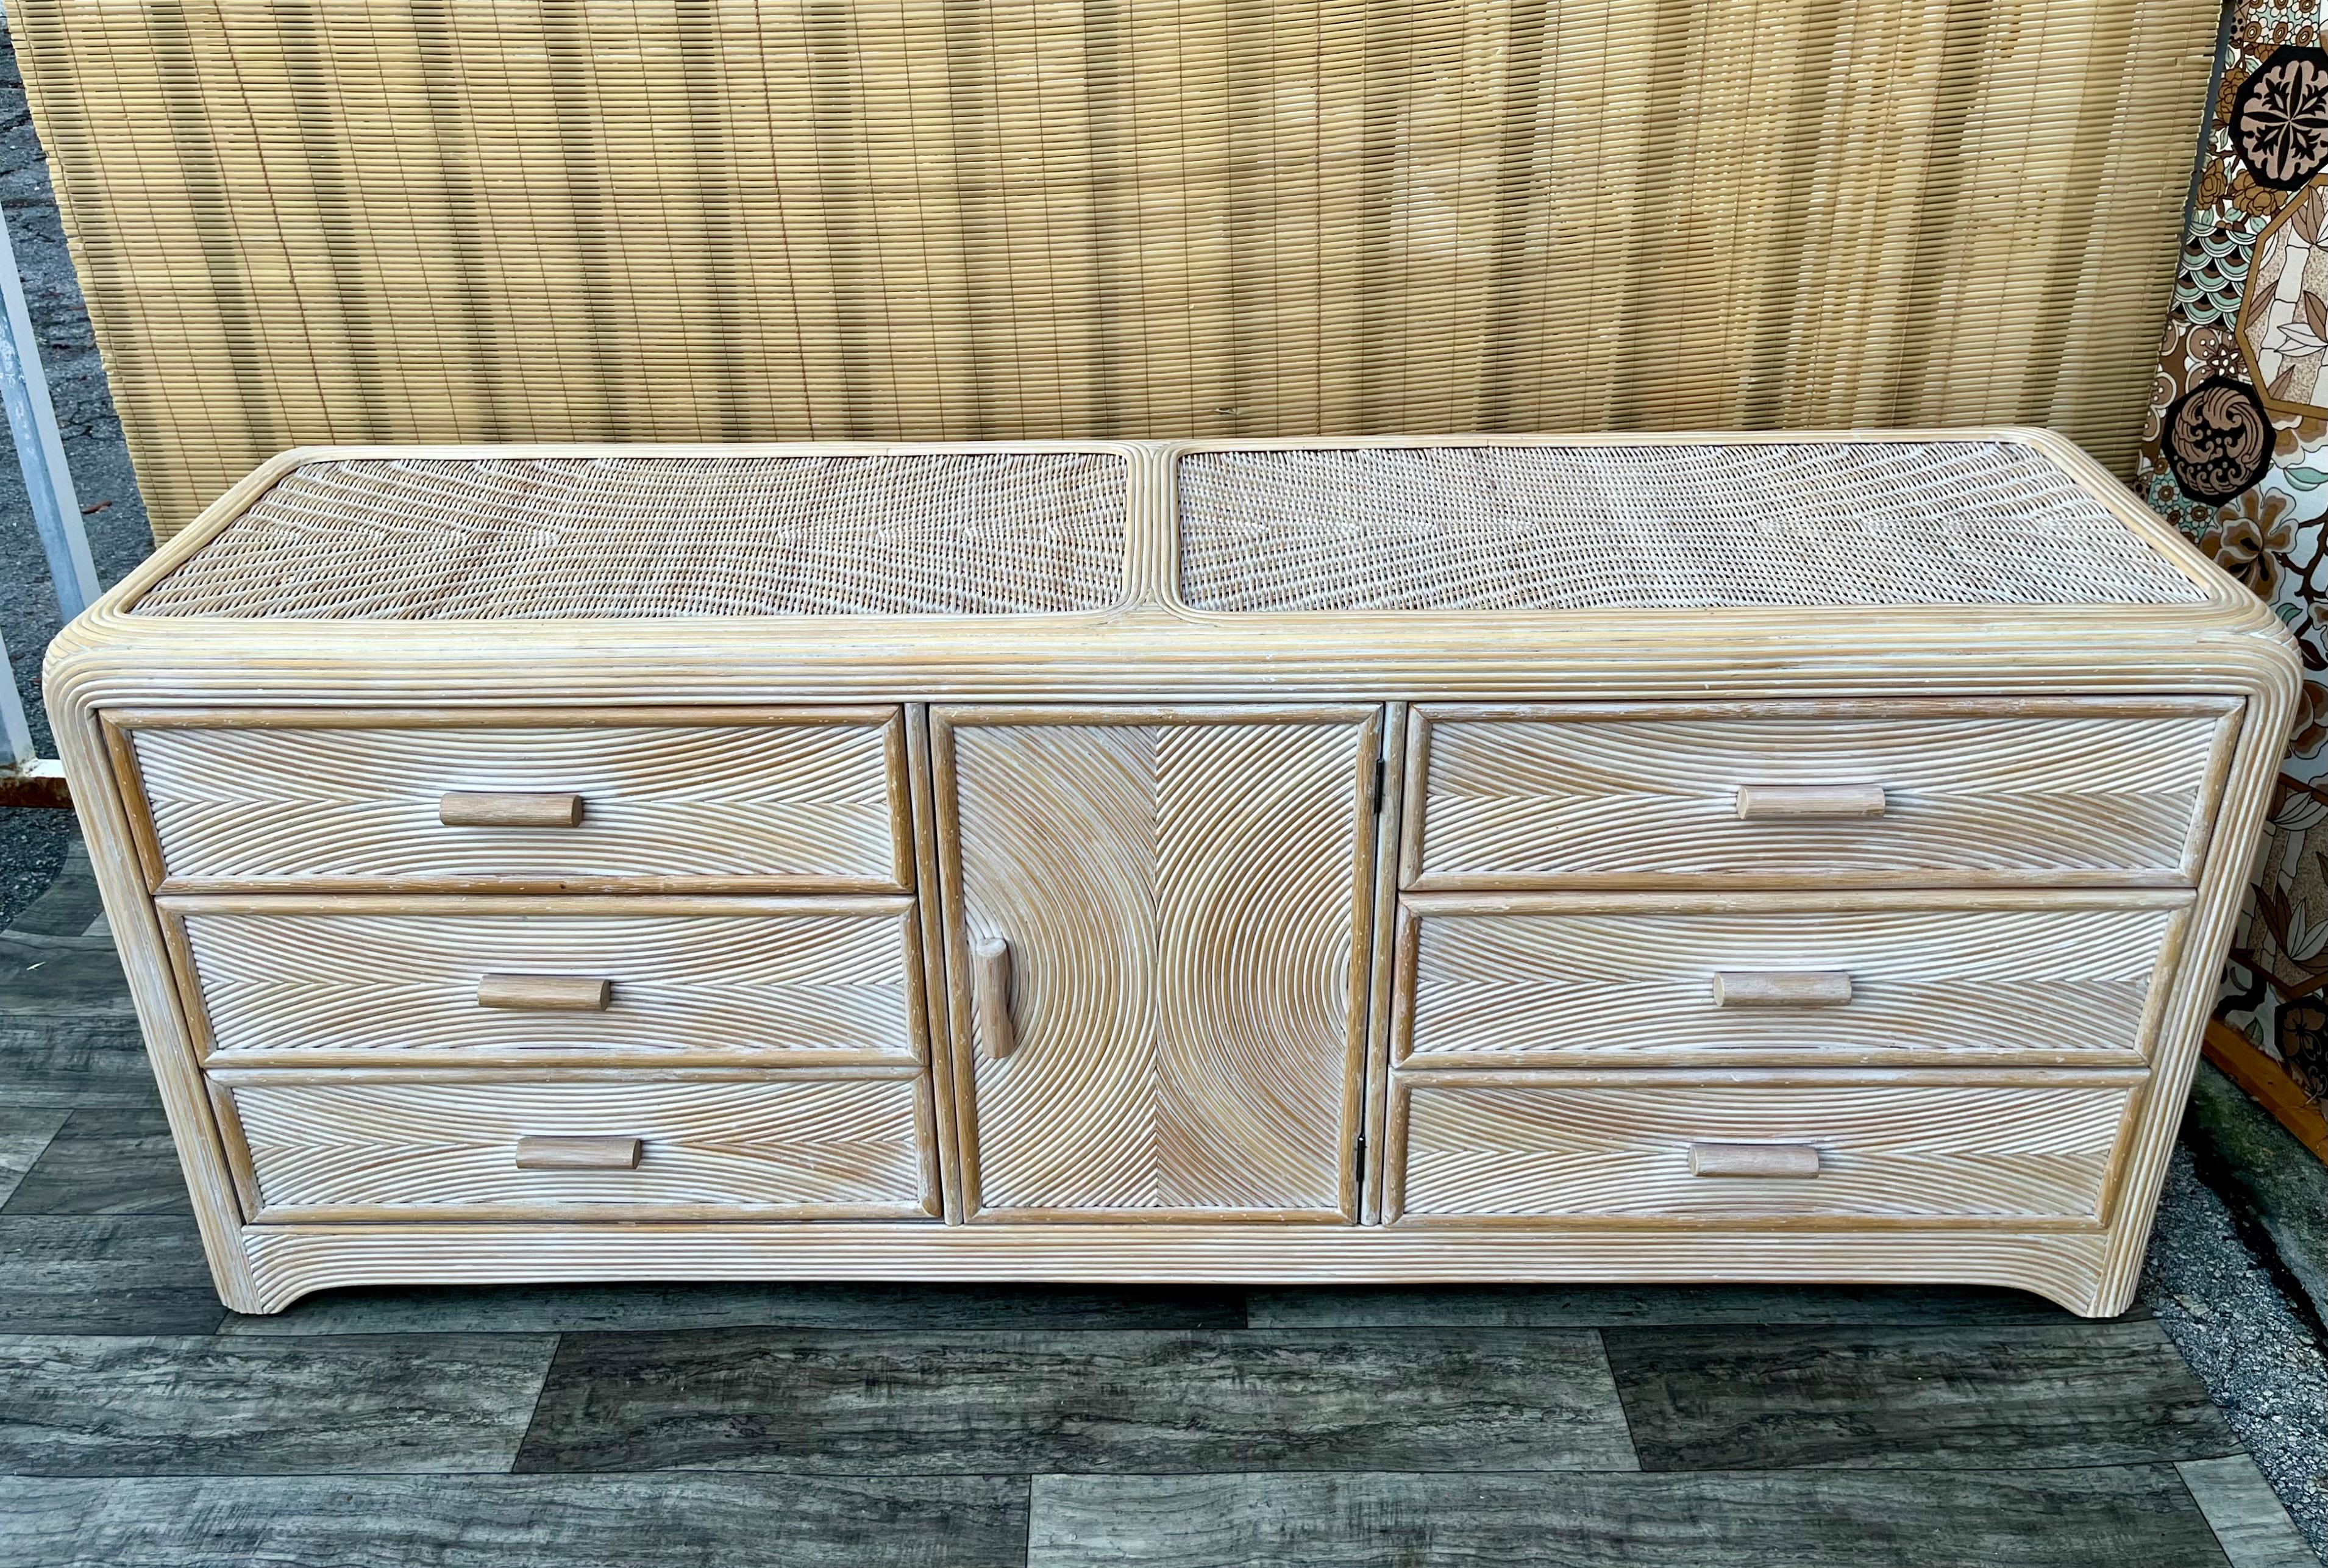 Vintage Coastal Style Split Reed Rattan Dresser. Circa 1980s
Features a chic rattan and split pencil reed swirl pattern design with rounded corners in a beautiful soft cream color with nine drawers that offer plenty of storage space.
In excellent